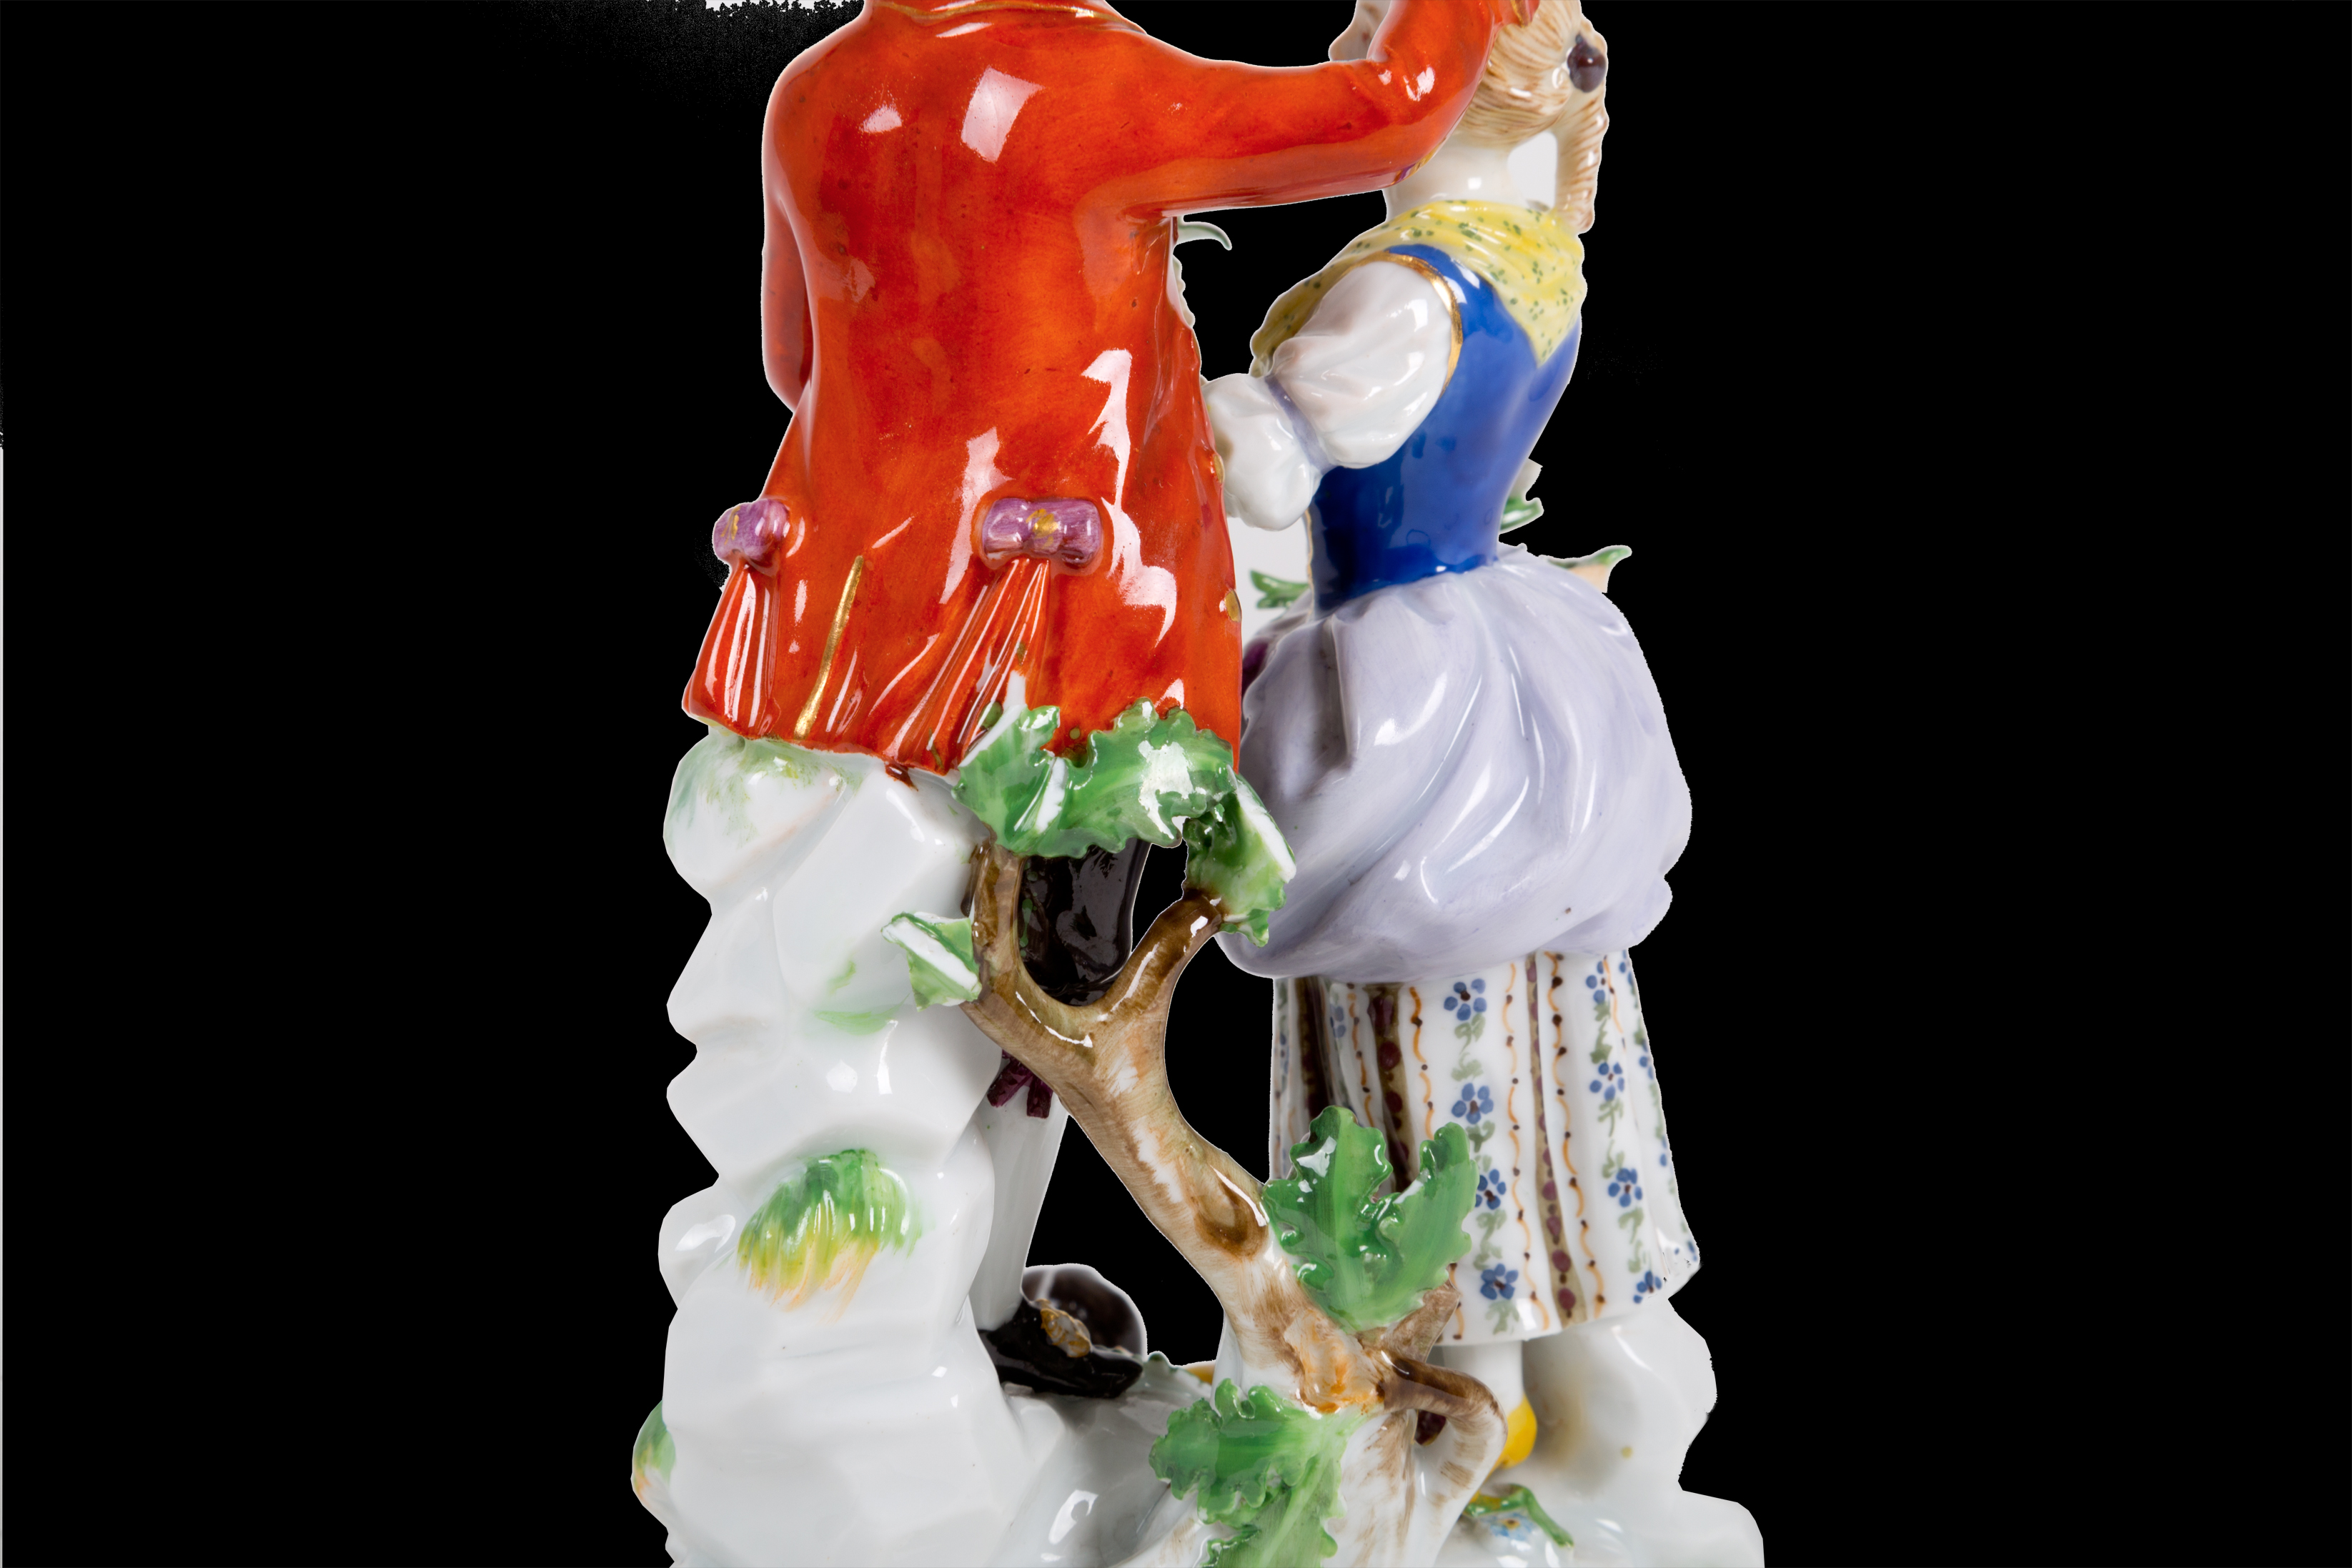 Meissen porcelain figurine. Late 18th-early 19th ce. - Image 4 of 5